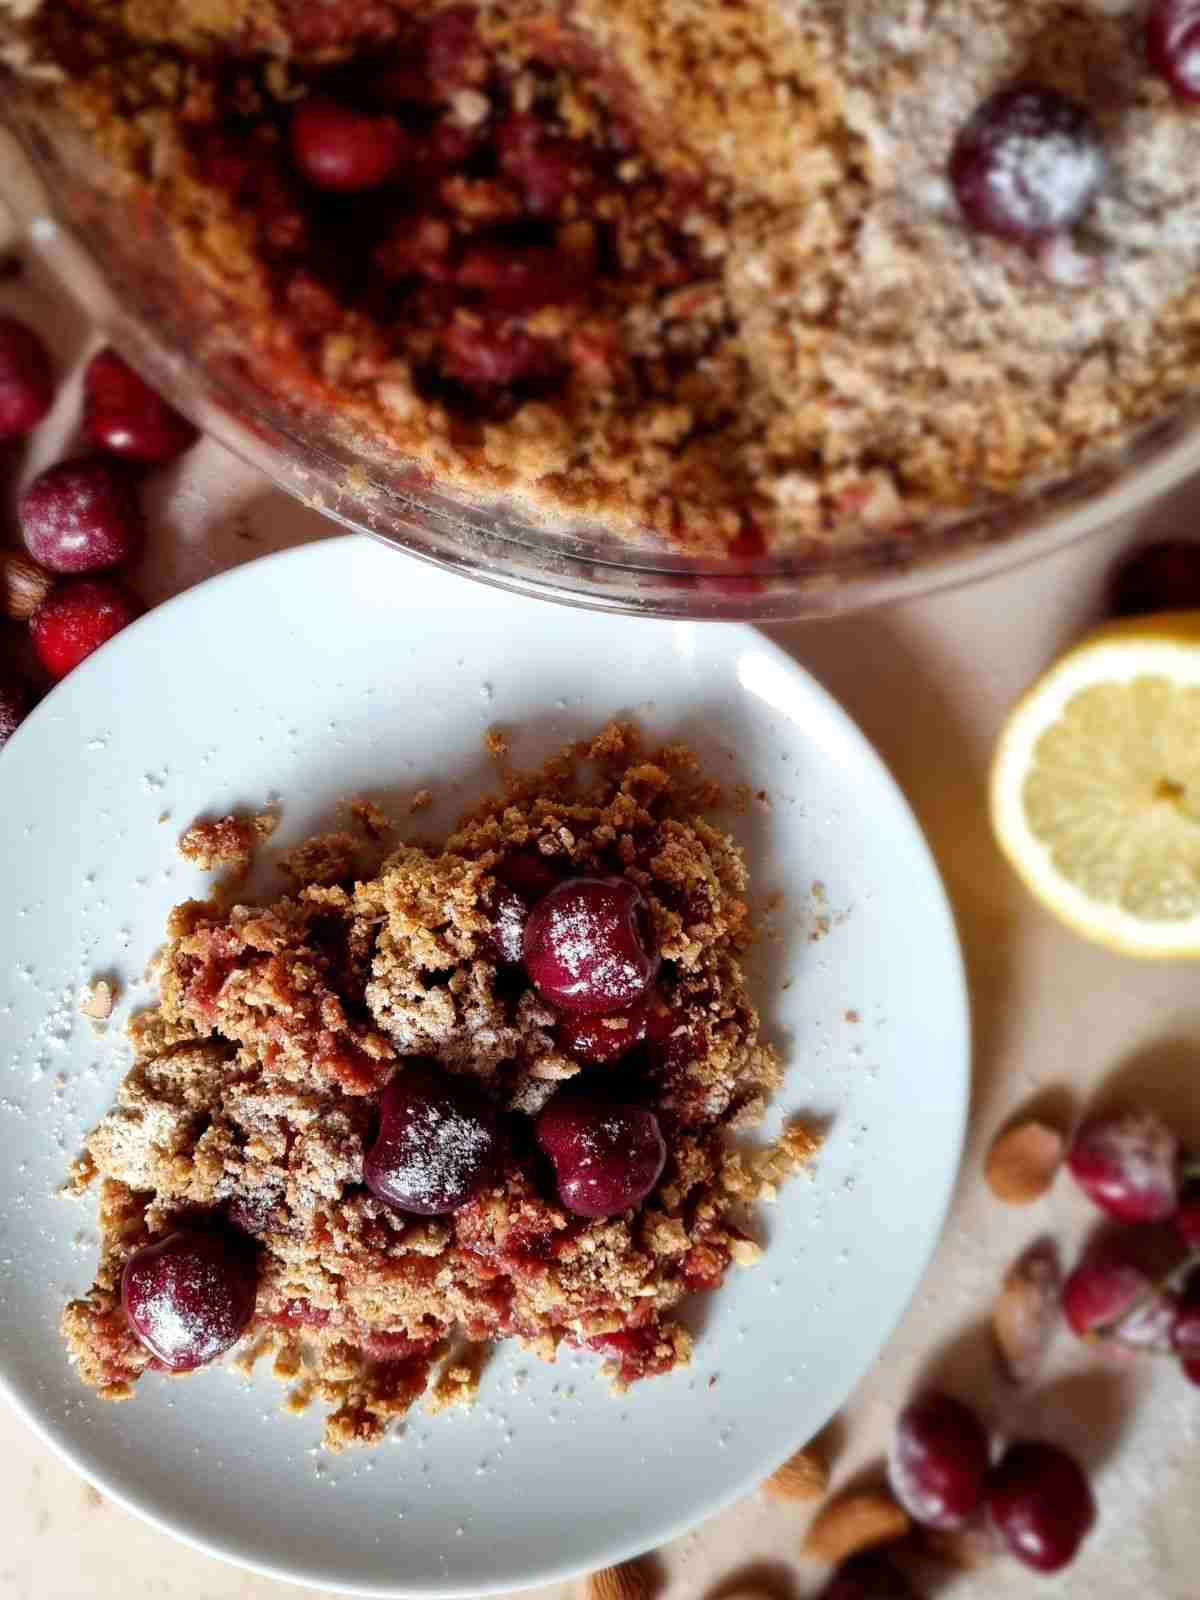 Gluten-free cherry crisp portion on a plate from above.